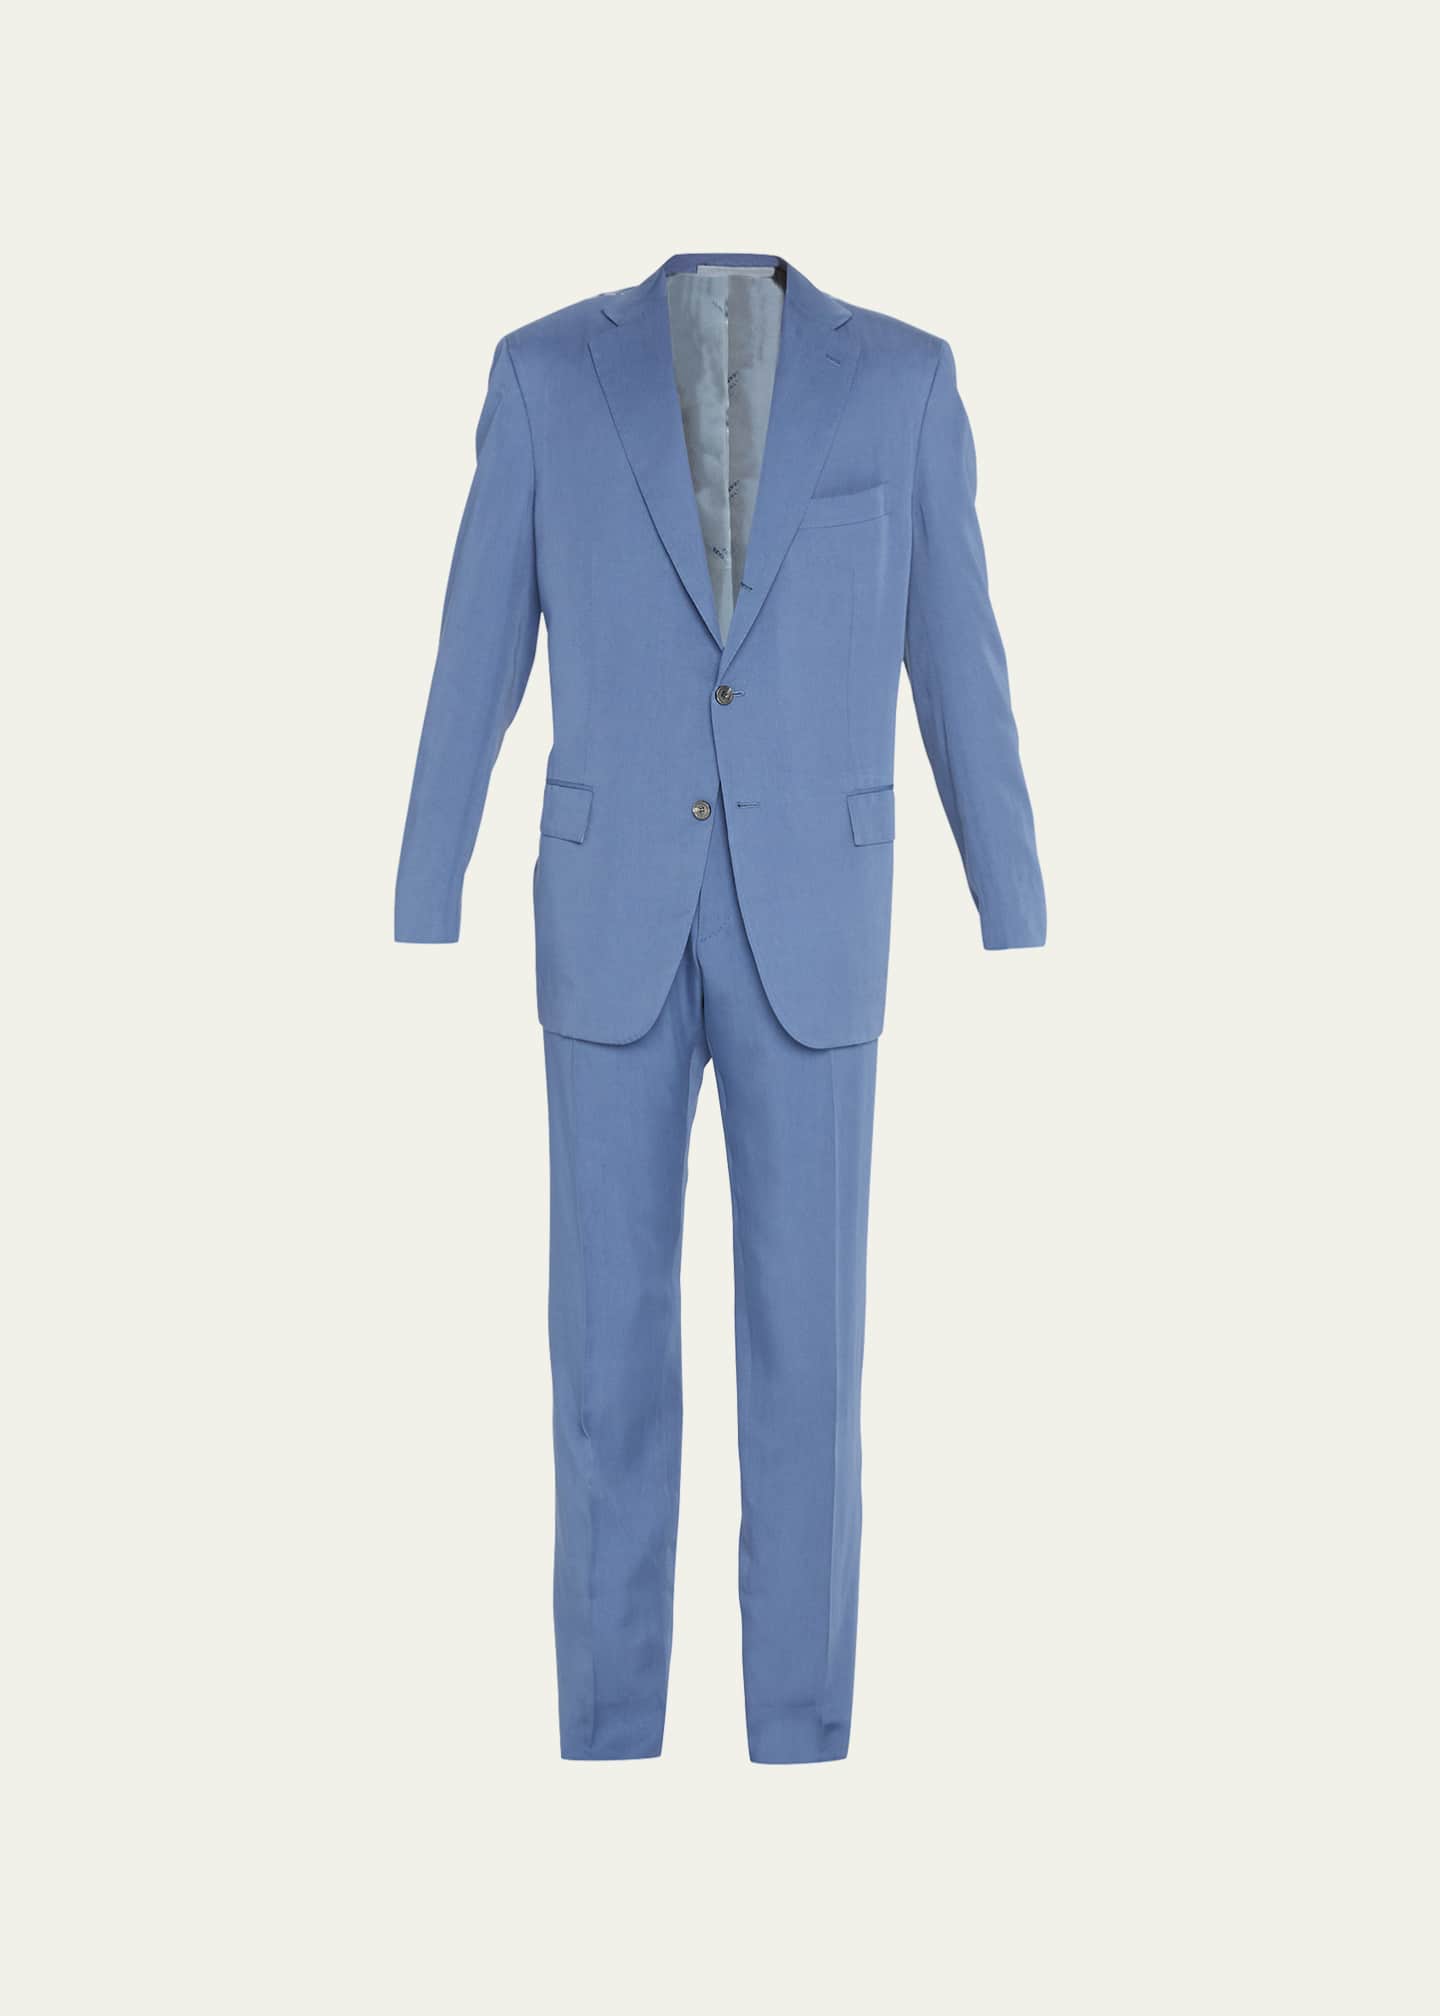 Kiton Men's Two-Piece Solid Suit - Bergdorf Goodman